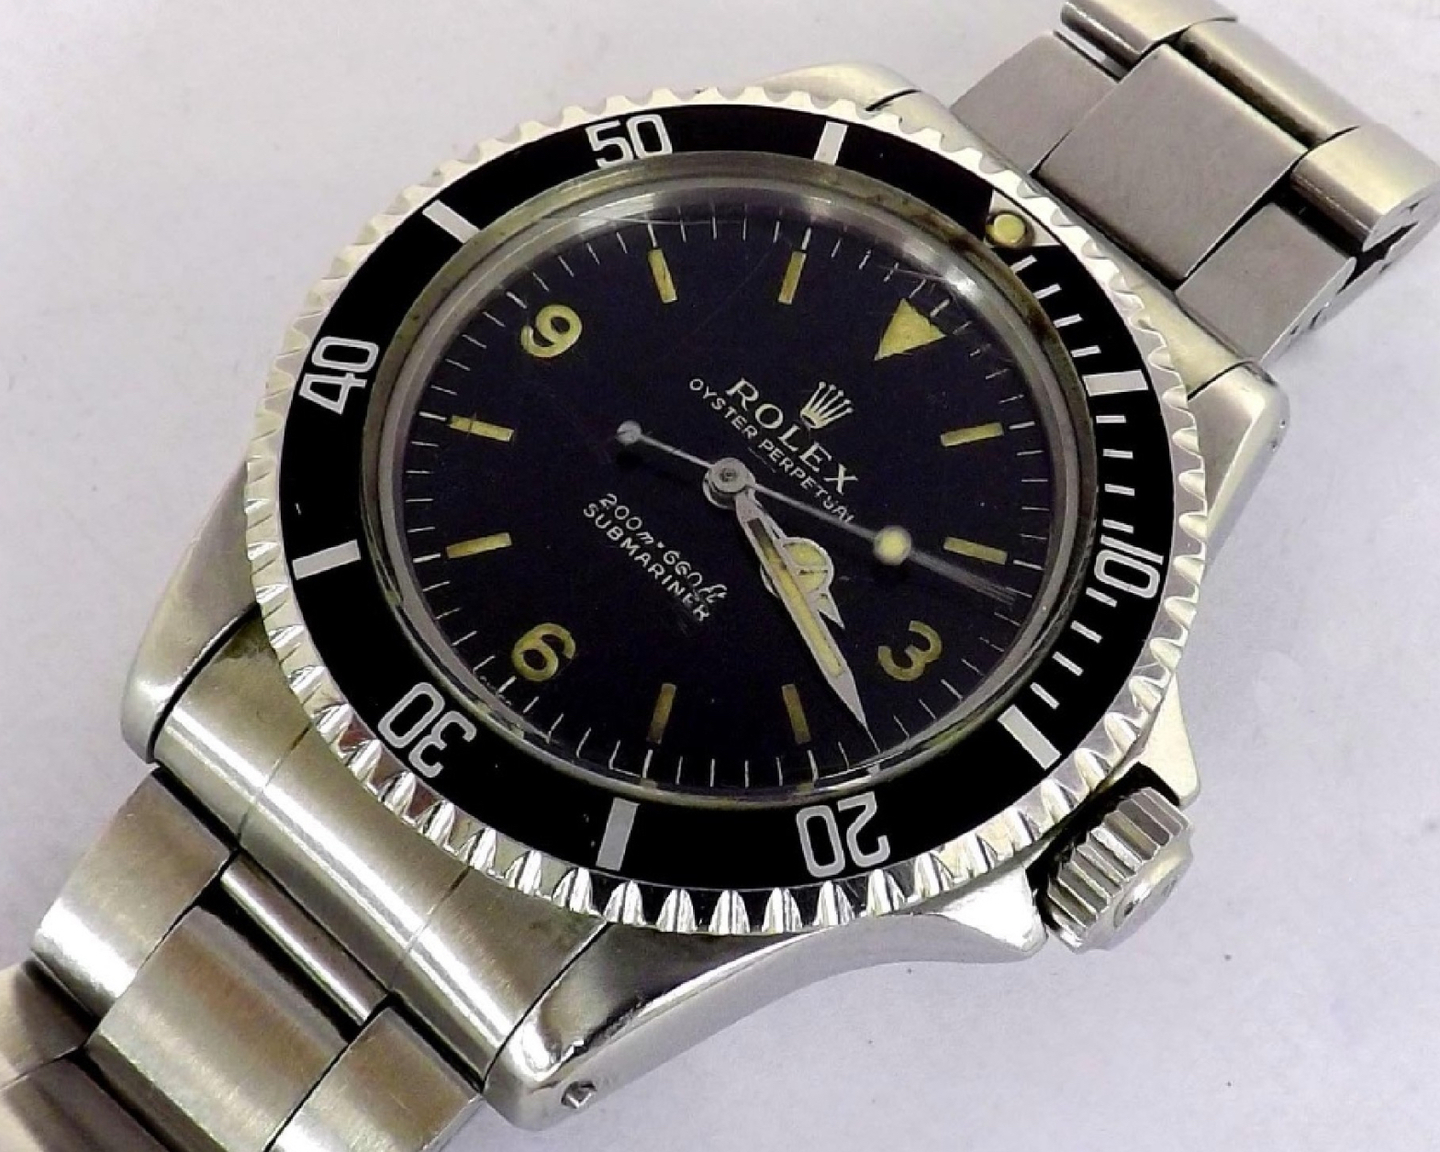 Original owner Rolex Submariner Ref. 5513 Explorer dial with box and papers to be auctioned